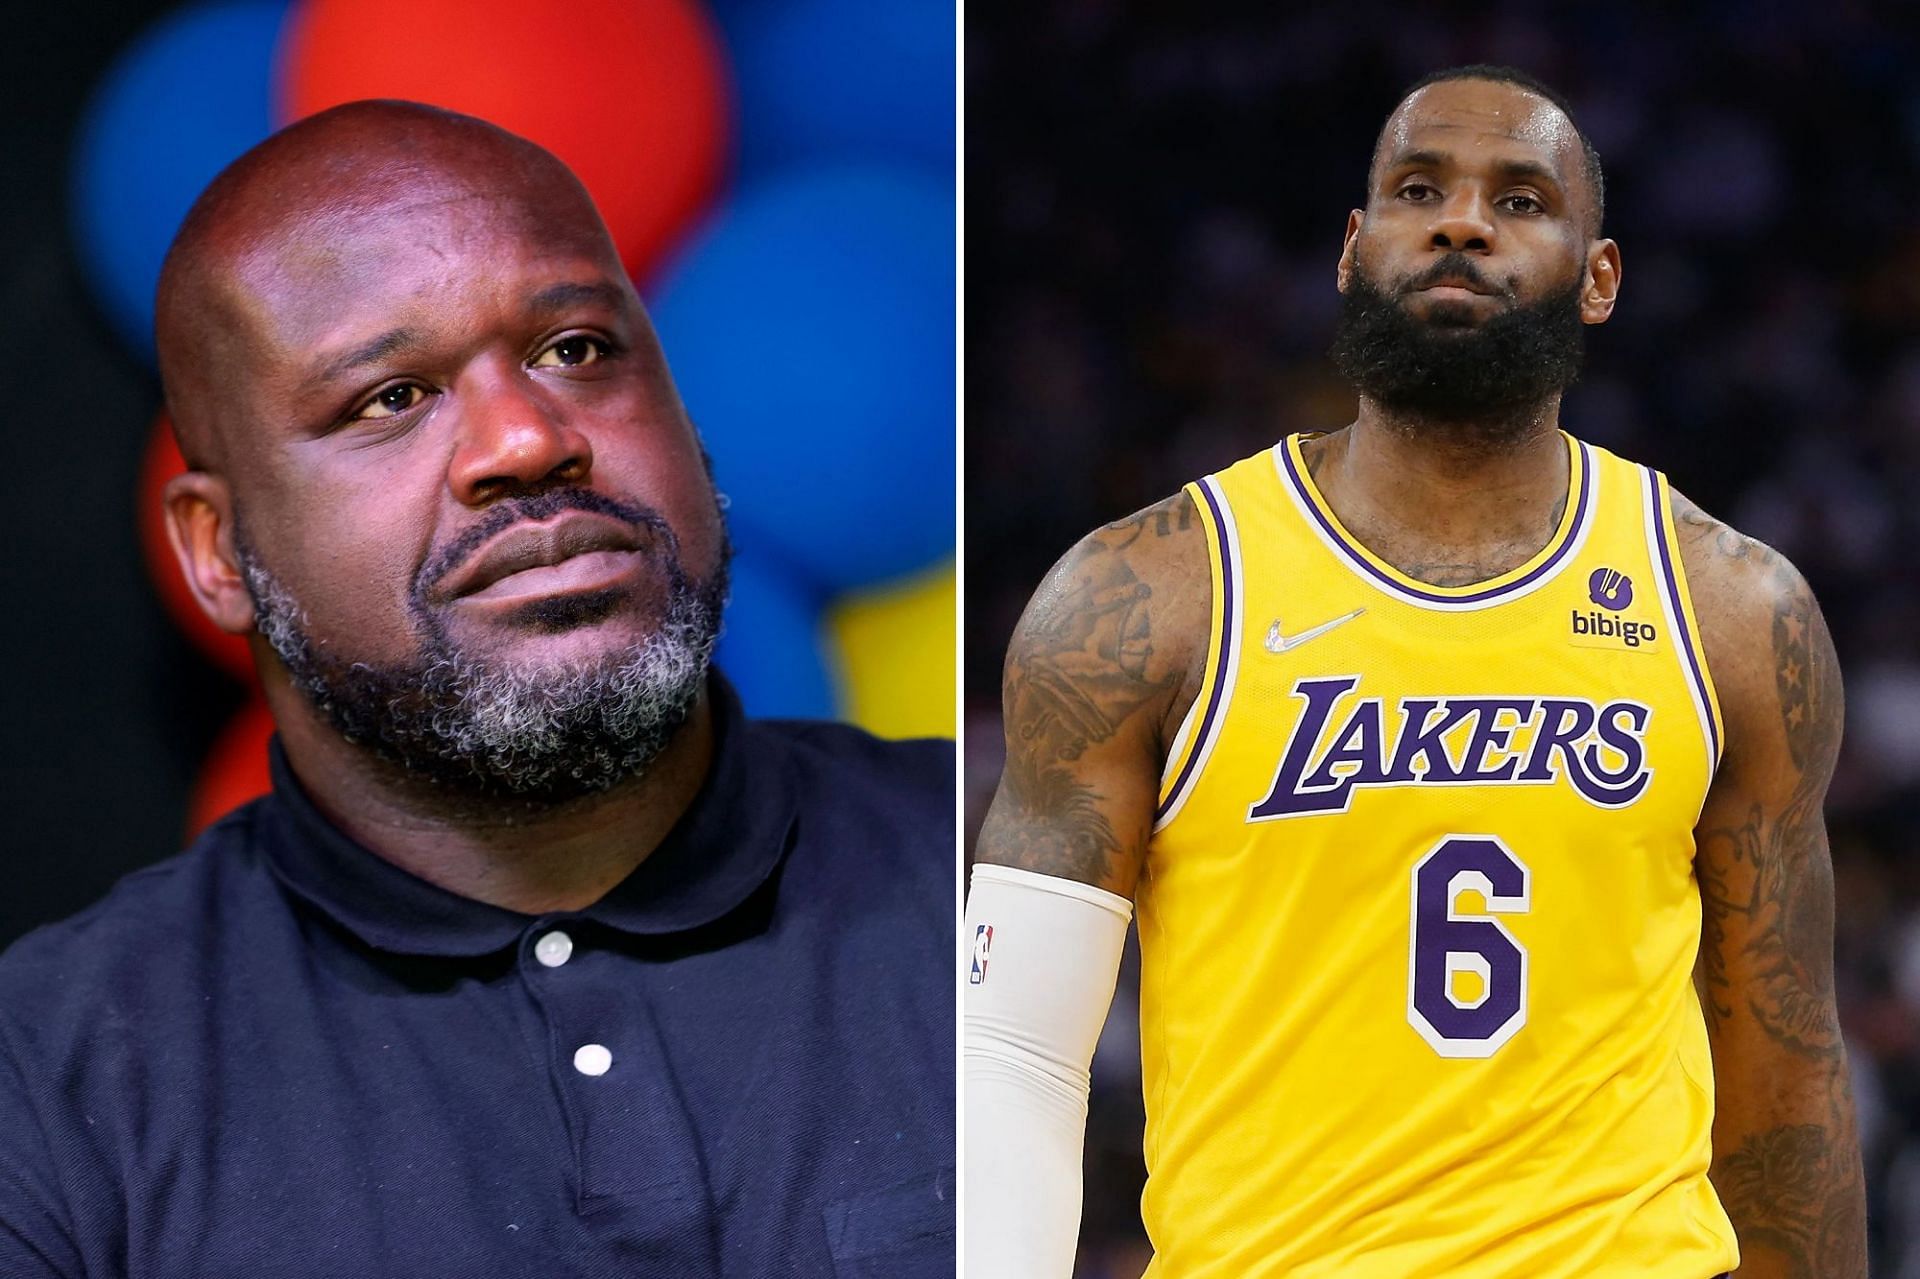 NBA legend Shaquille O&rsquo;Neal and LA Lakers star forward LeBron James